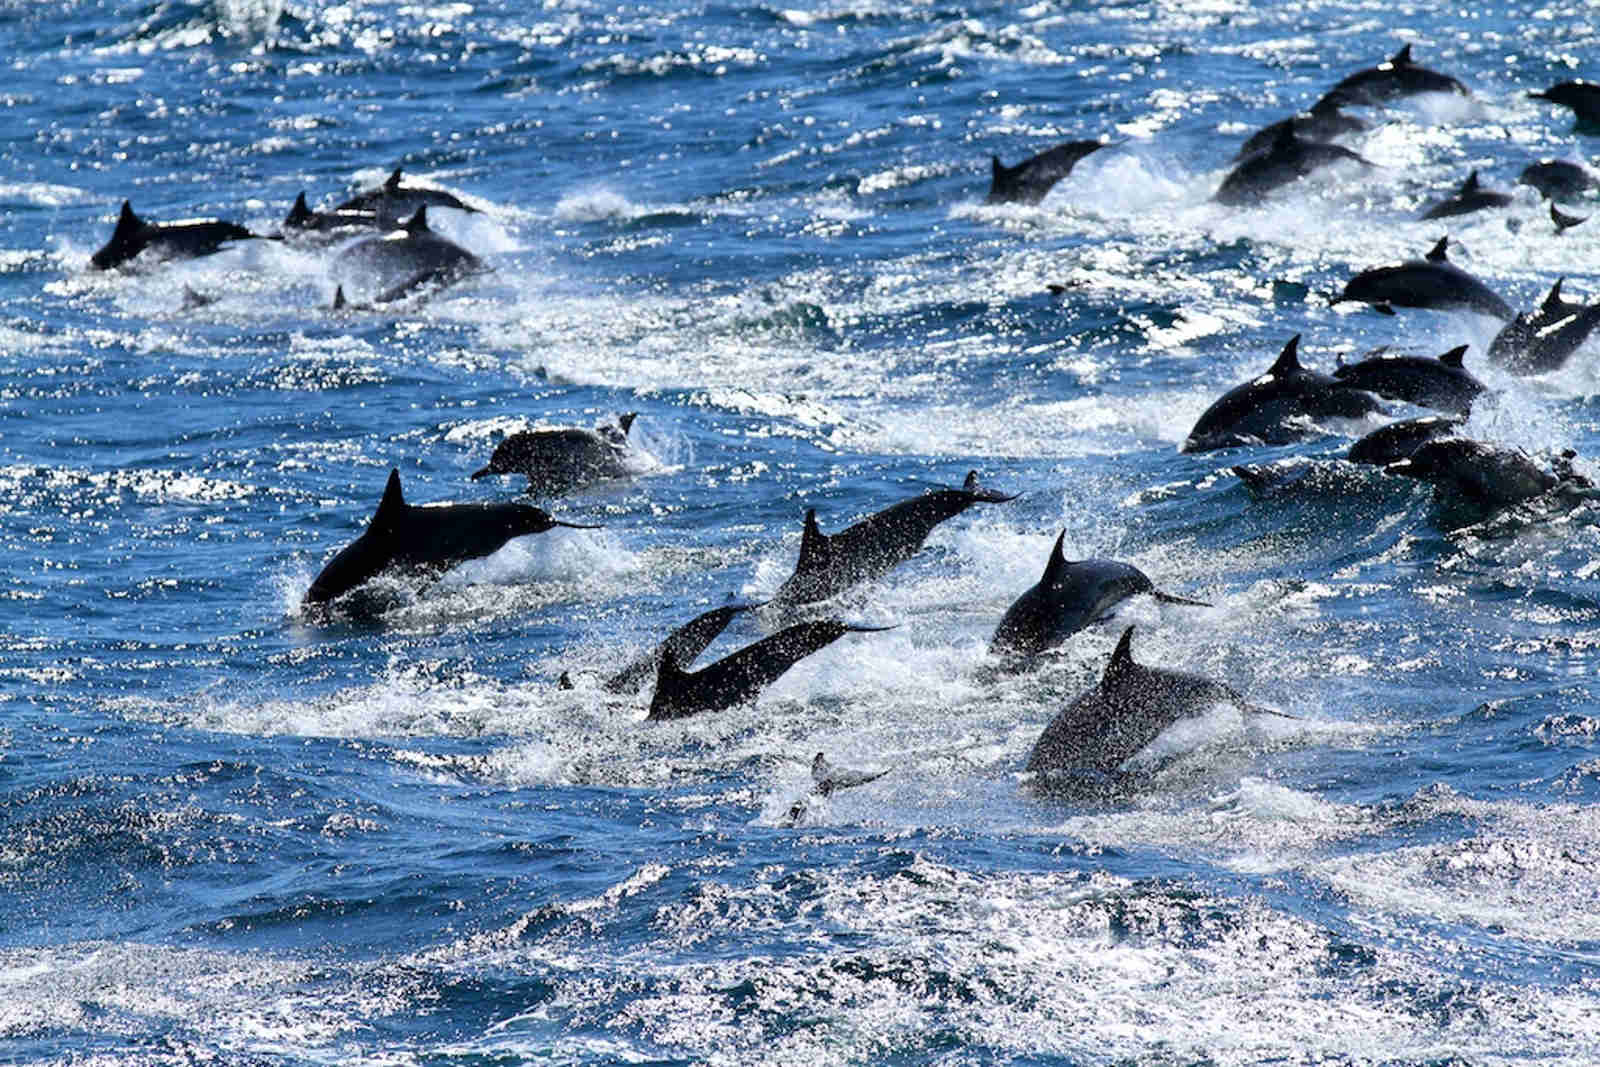 This is How We Should Experience Dolphins and Whales (VIDEO)